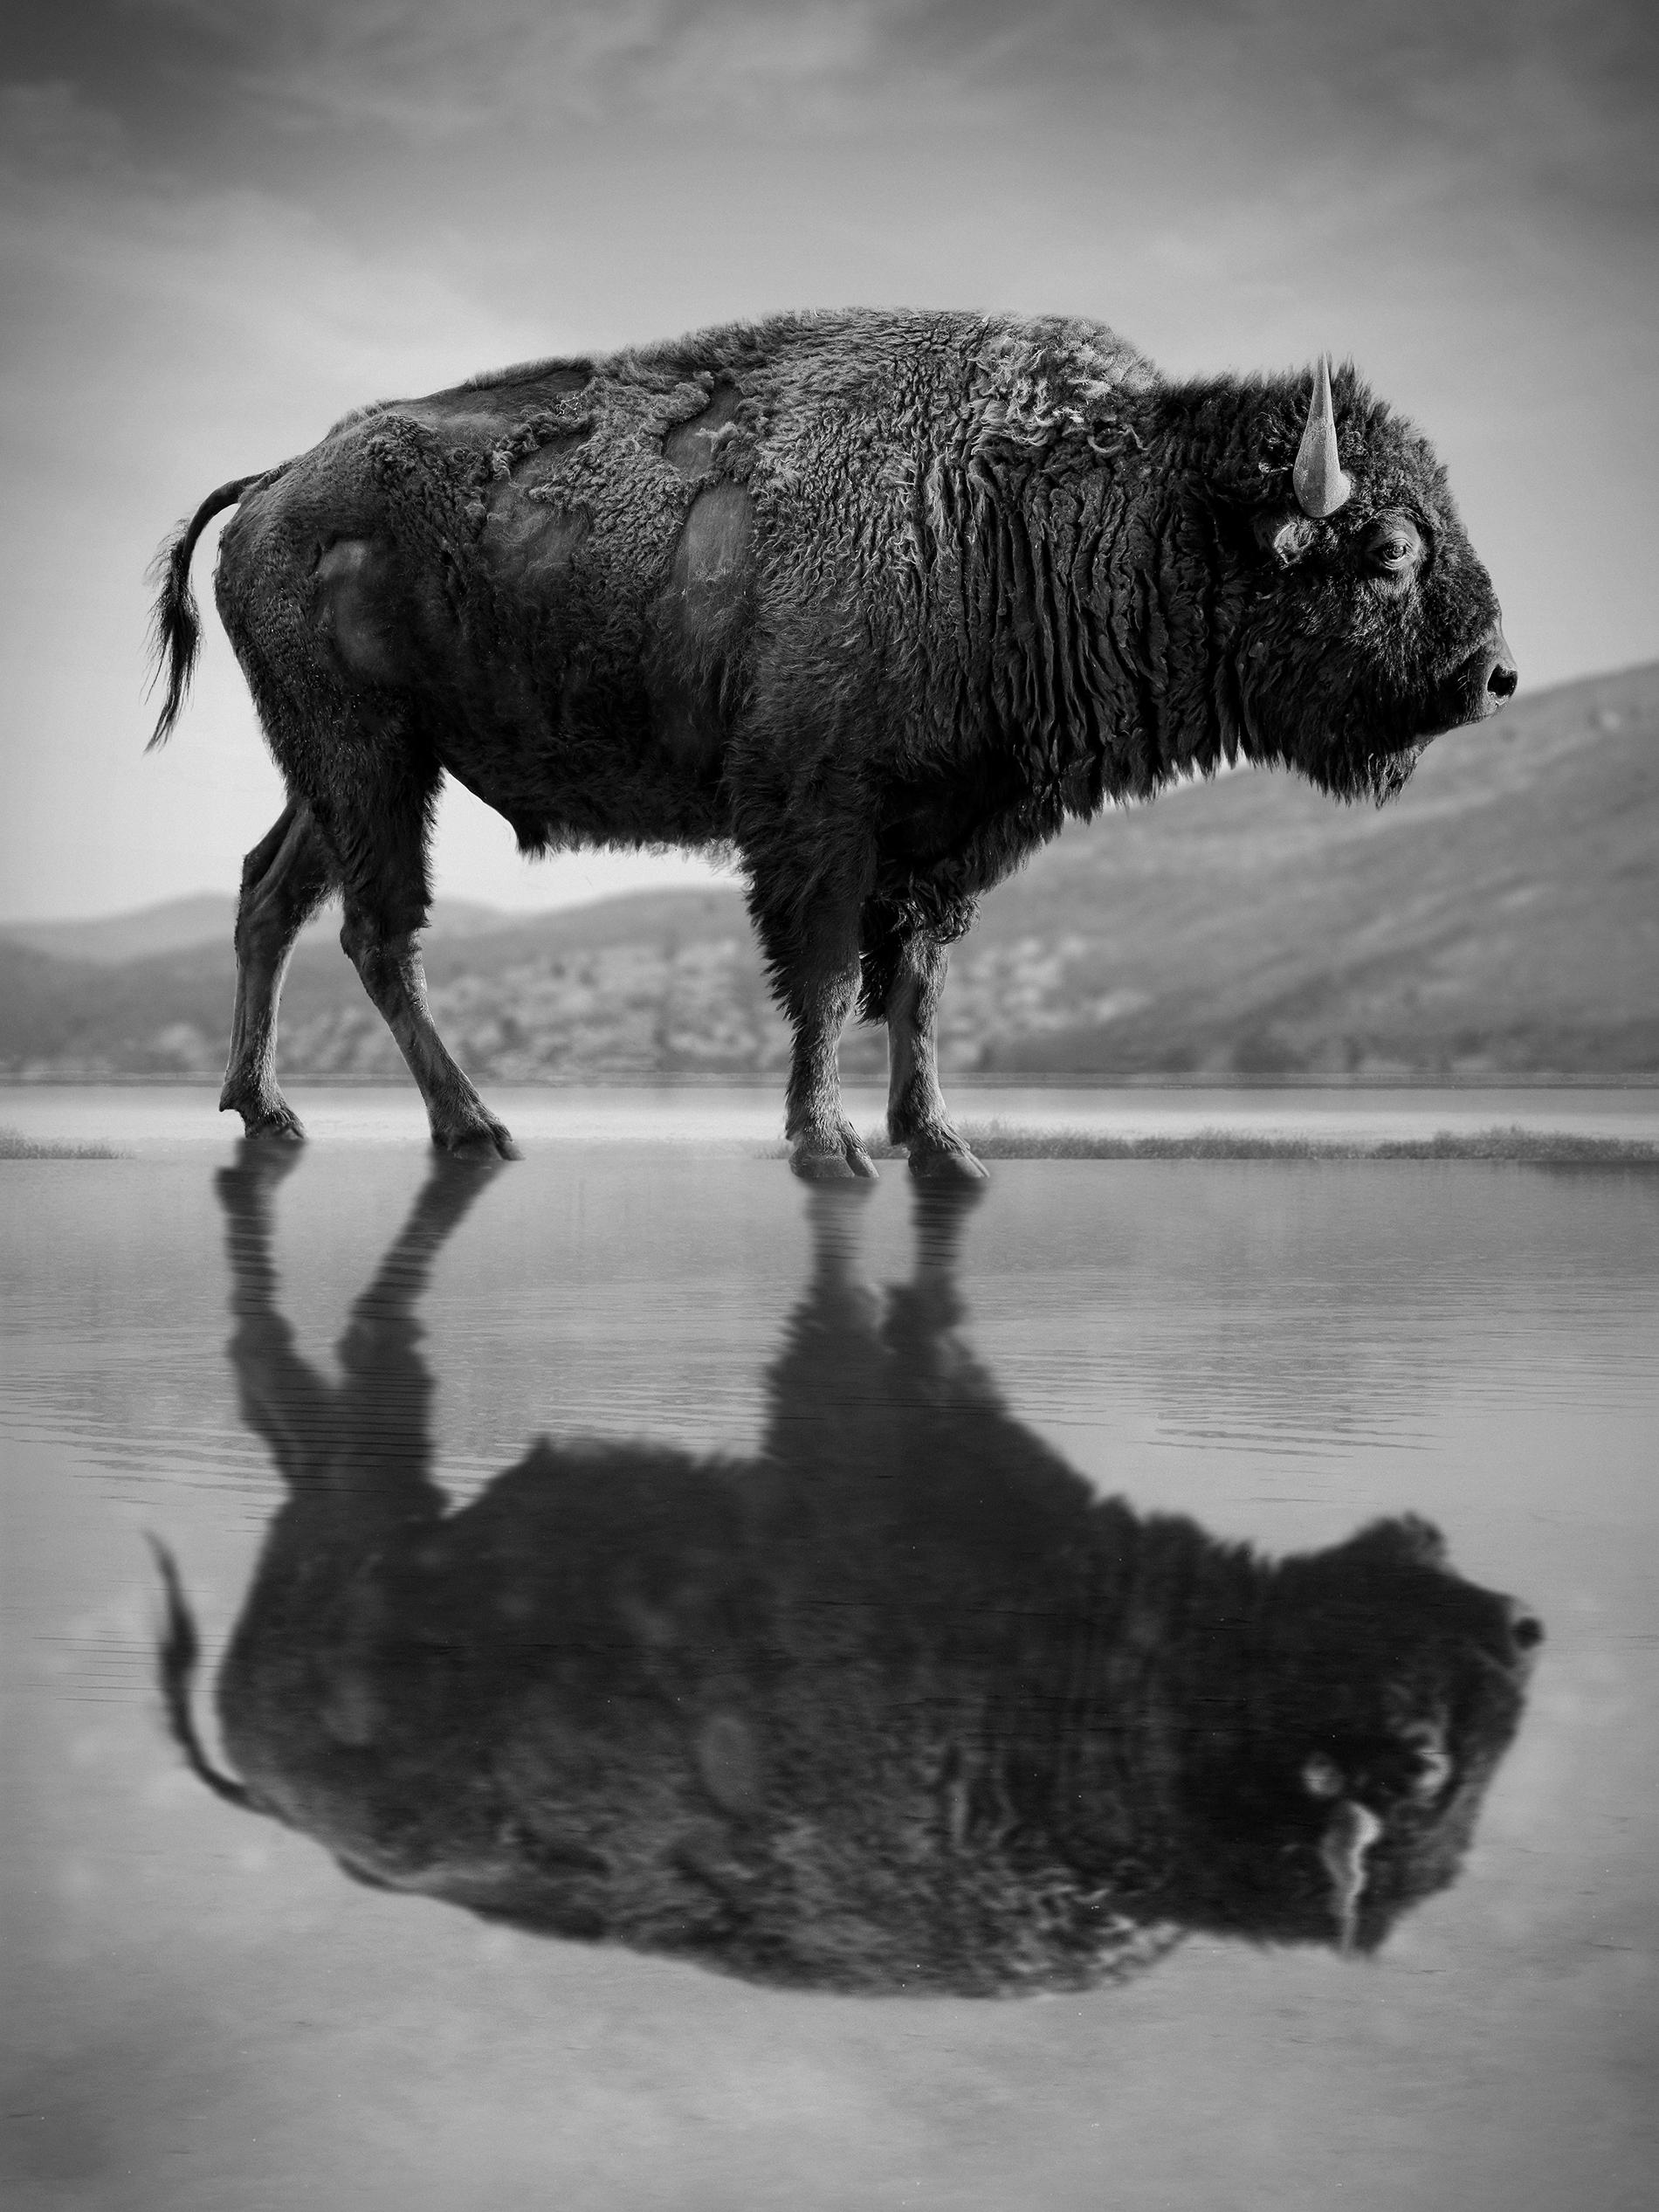 Shane Russeck Black and White Photograph - "Old World" 40x28  Black & White Photography Bison Buffalo Unsigned Photograph 